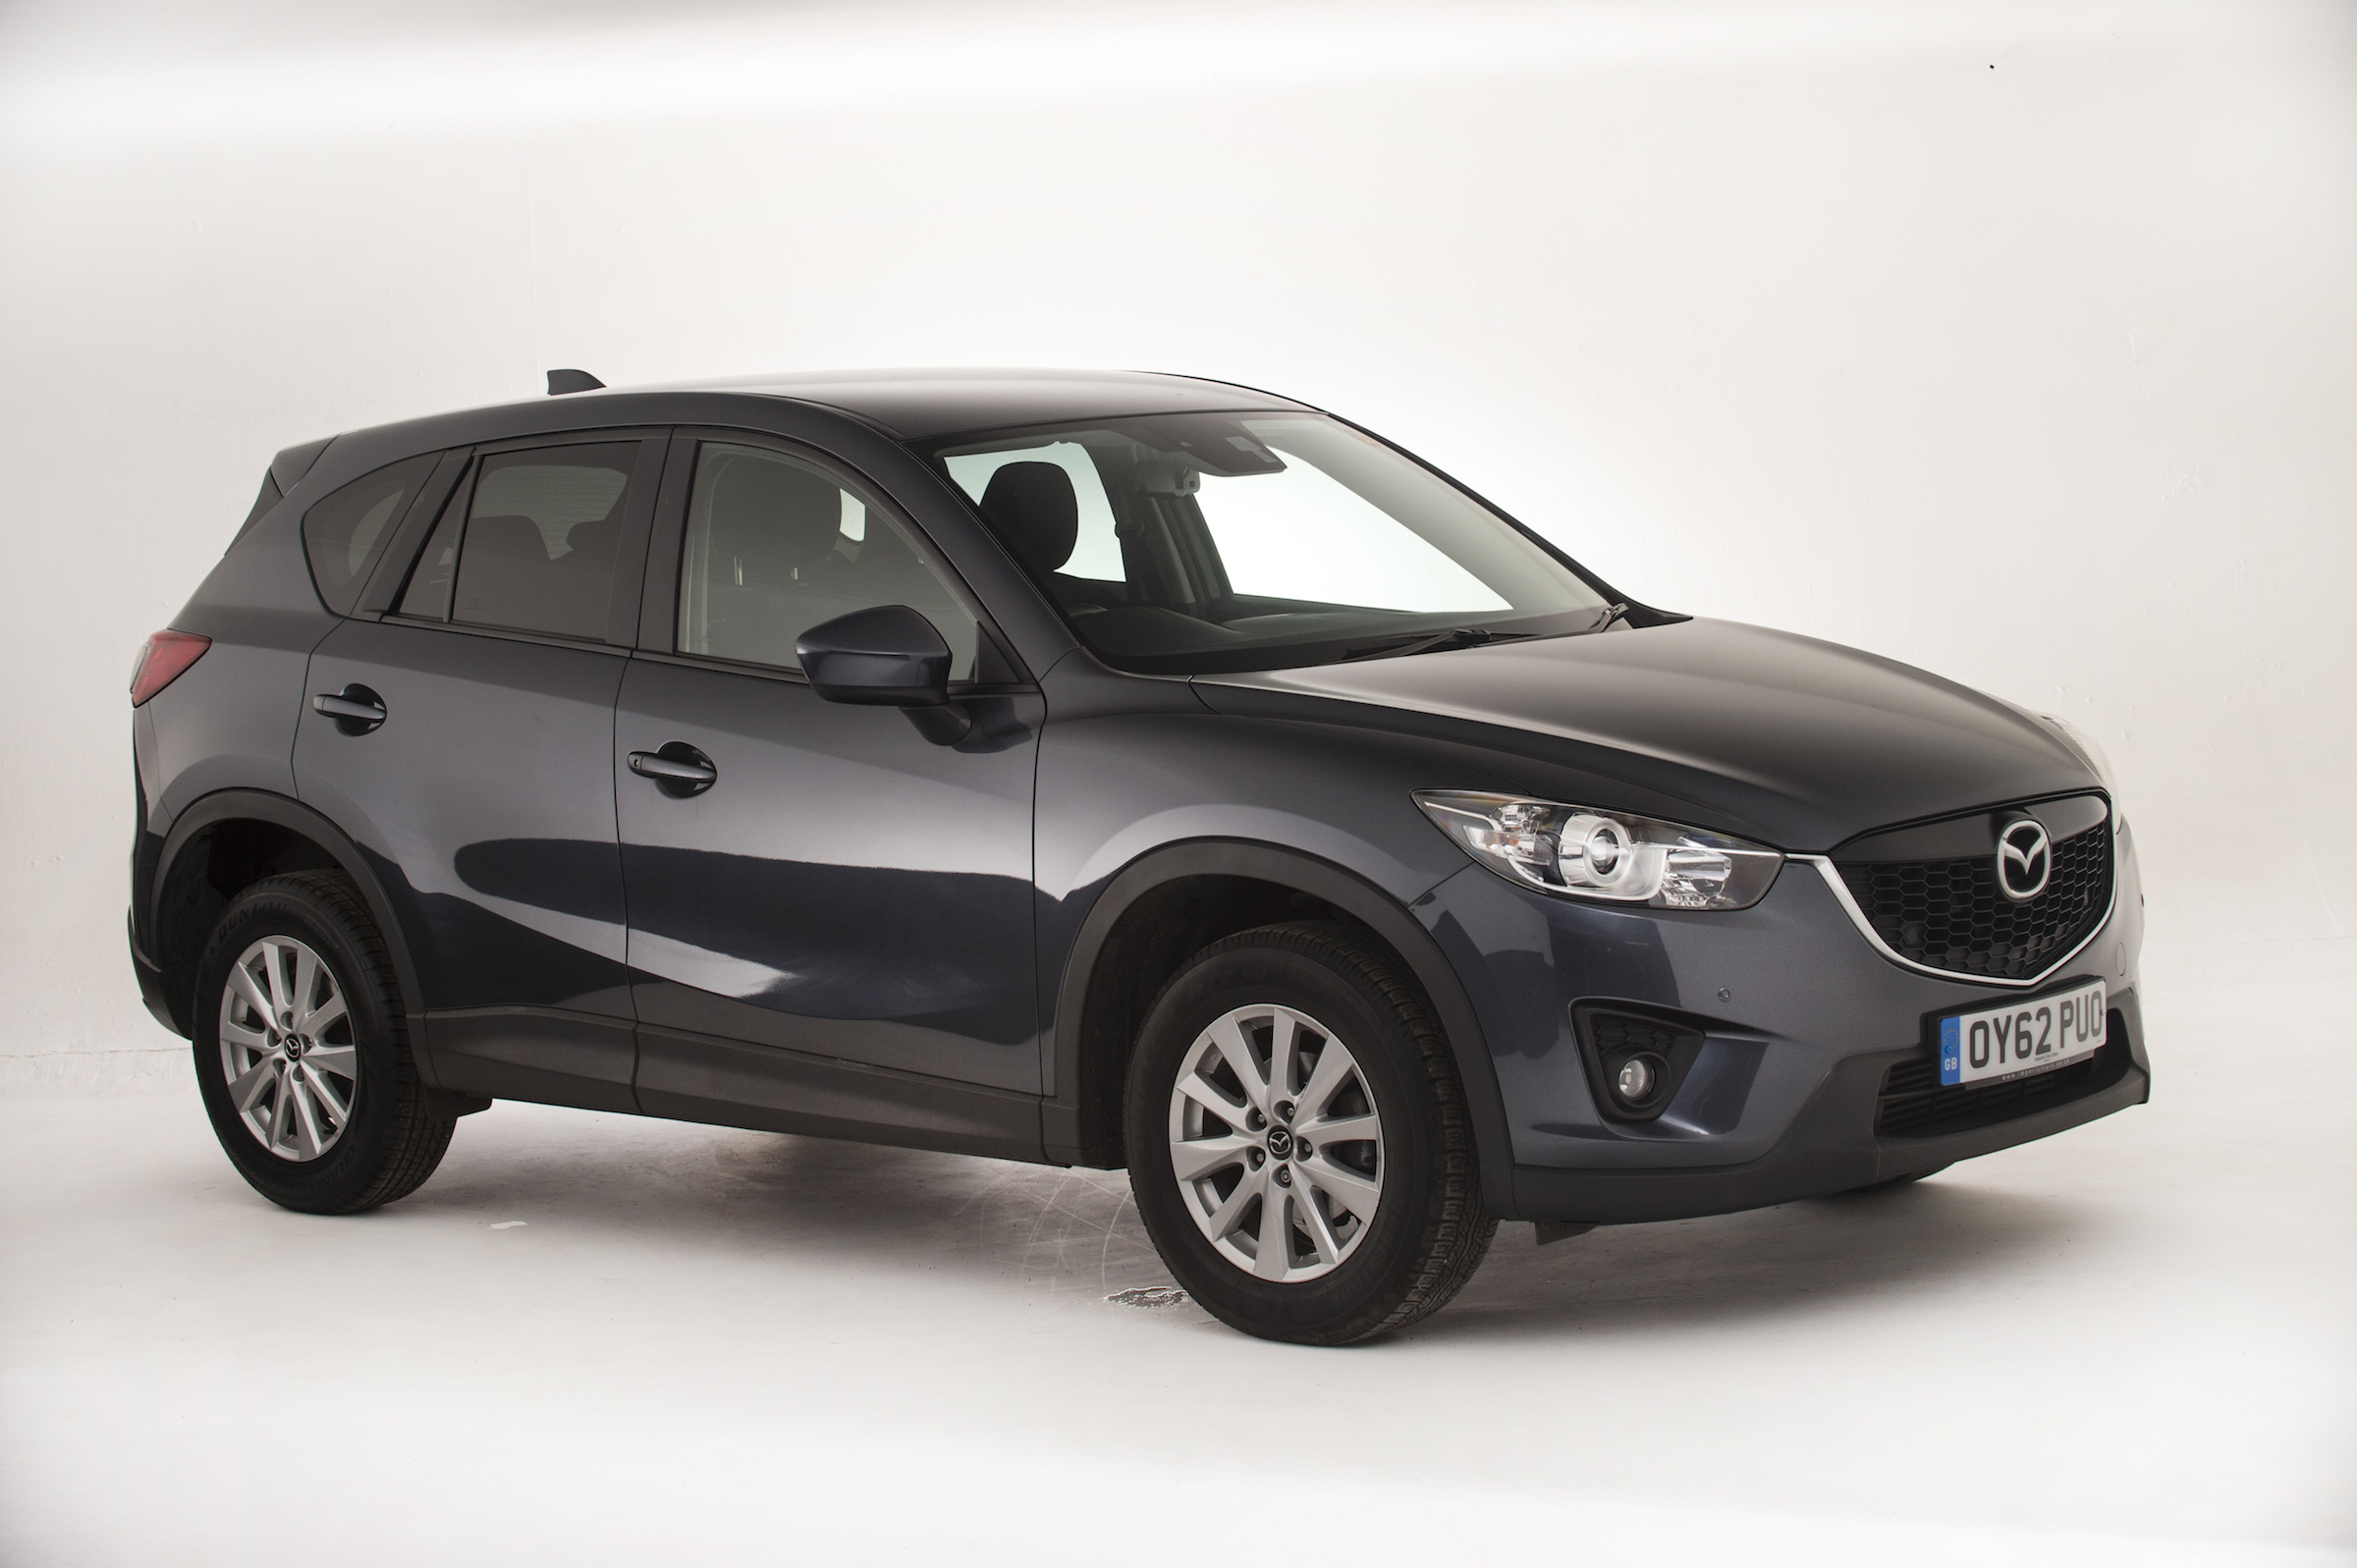 Used Mazda Cx 5 Buying Guide Gallery Carbuyer